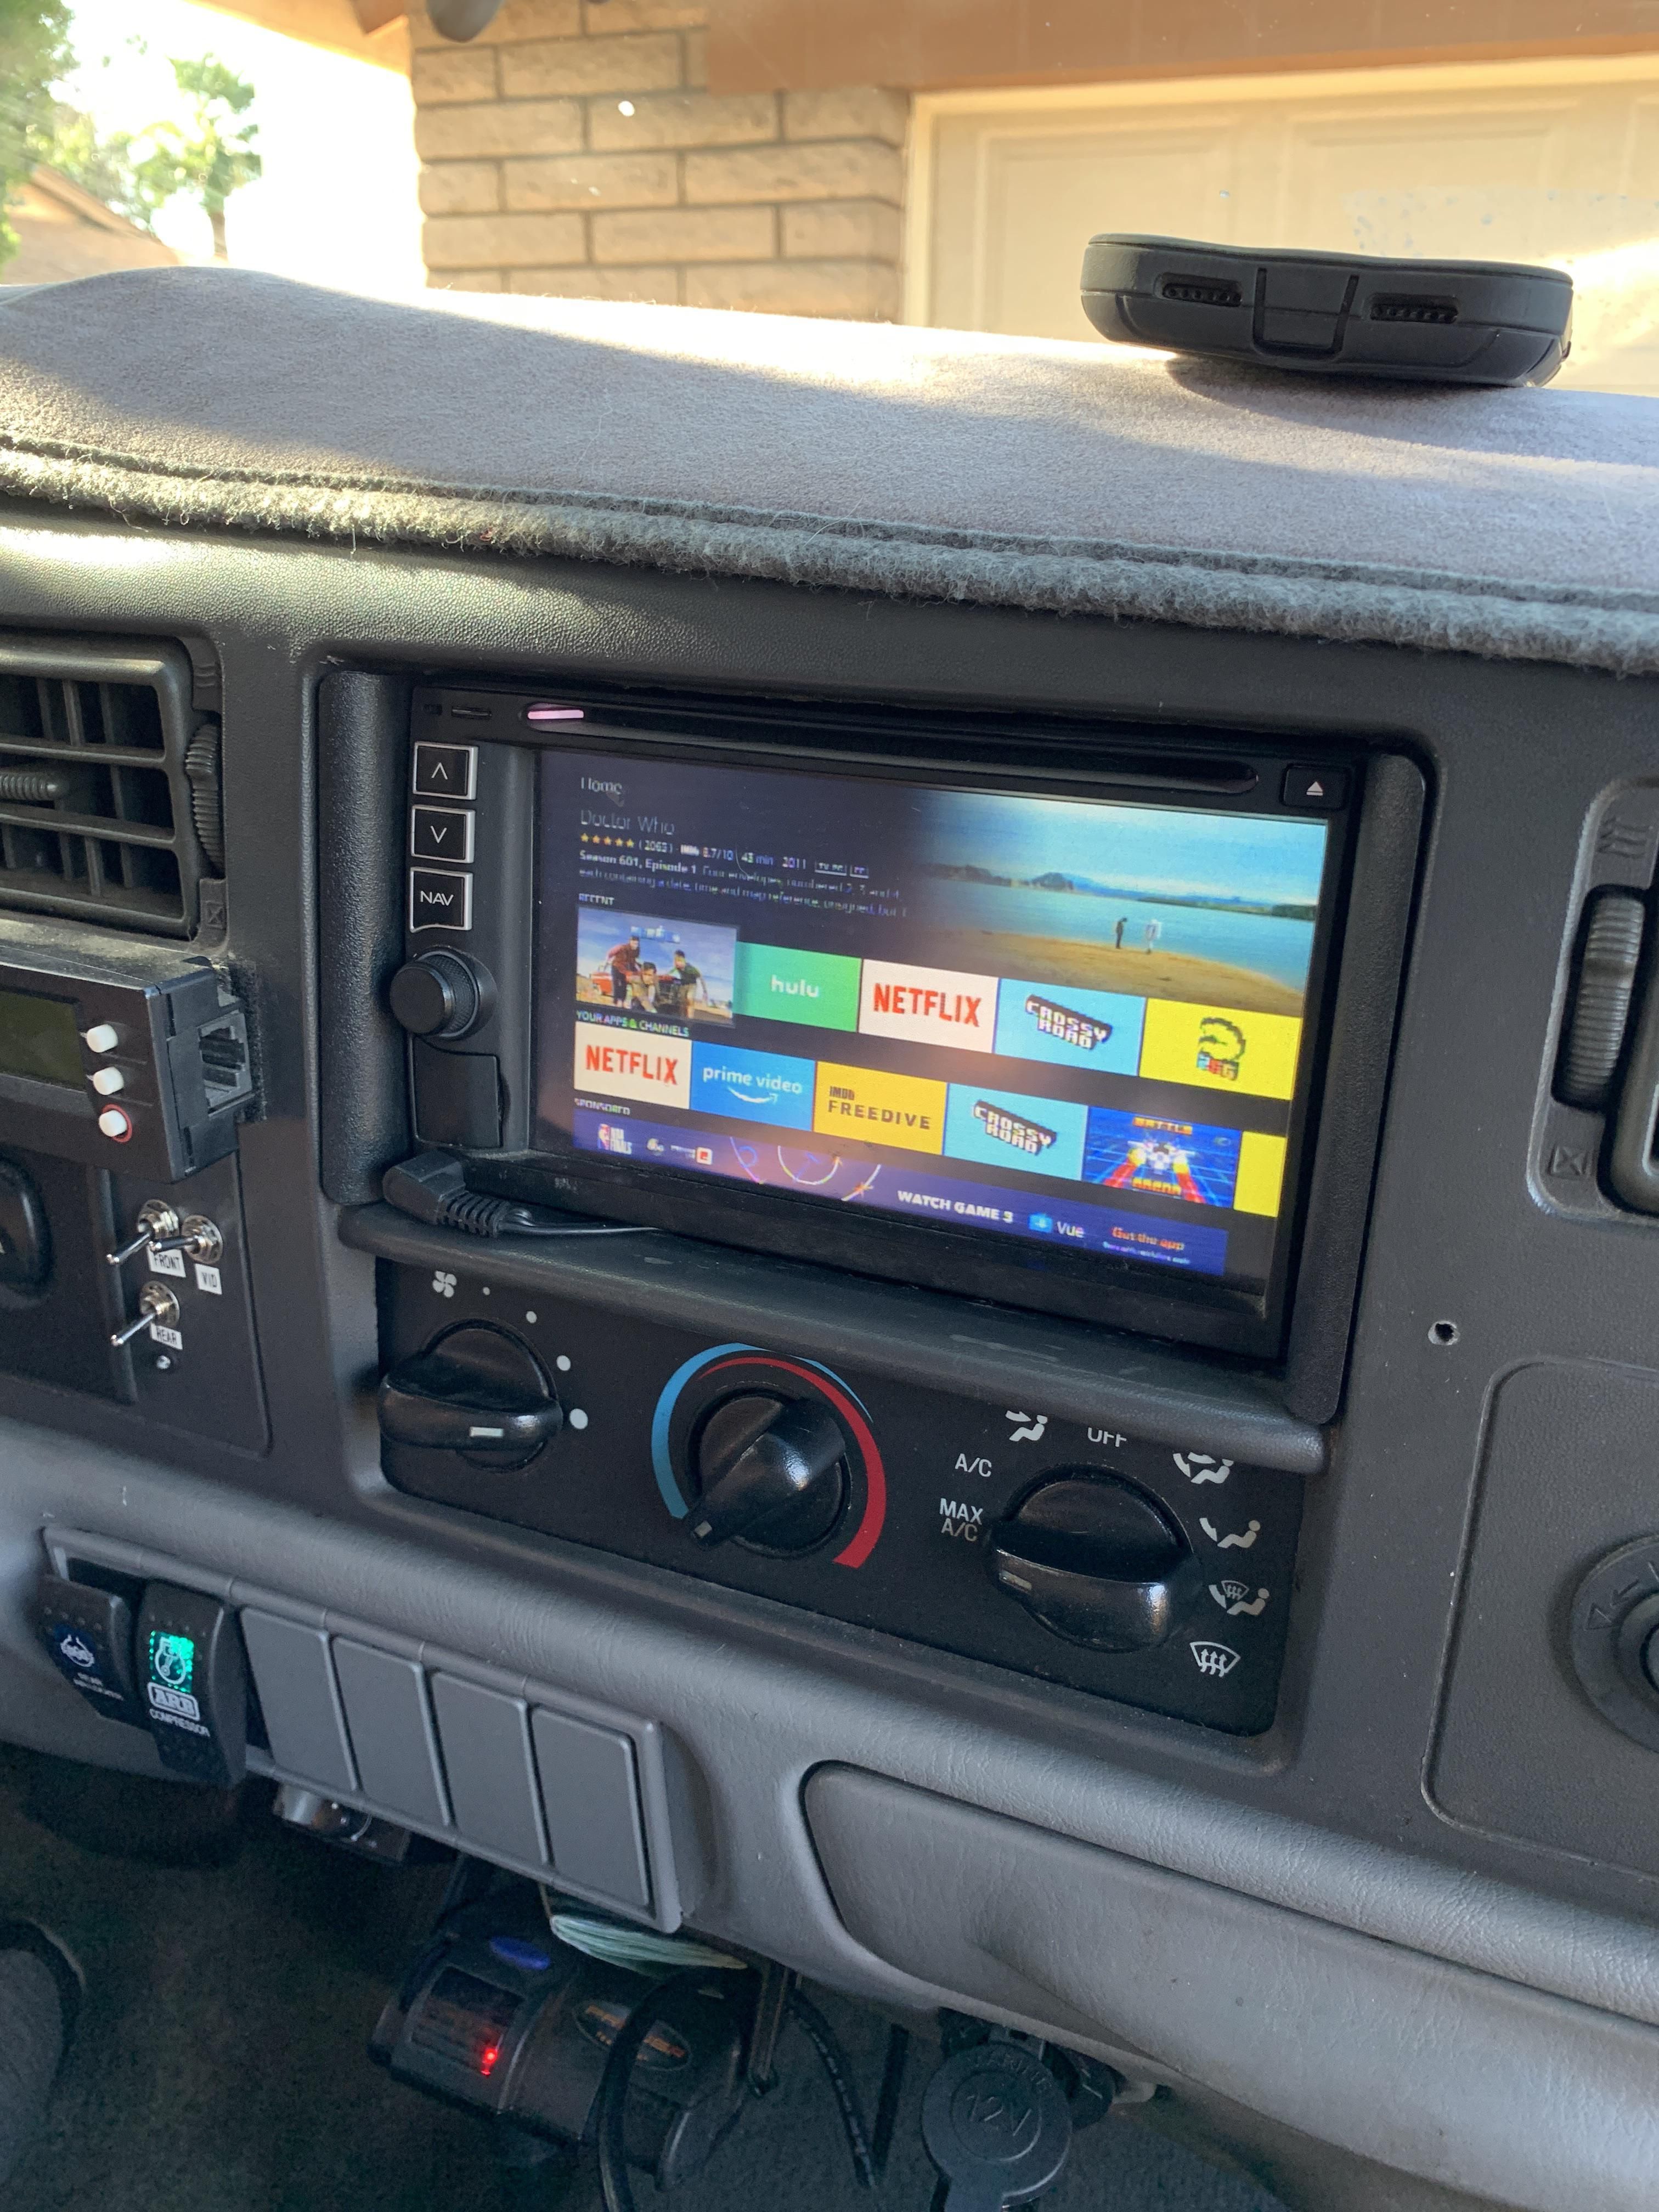 My dad is ***ing insane. He set up his truck with an amazon fire stick for a cross country voyage with my mom and my little sister. He has a screen in the roof too and a phone with unlimited hotspot.